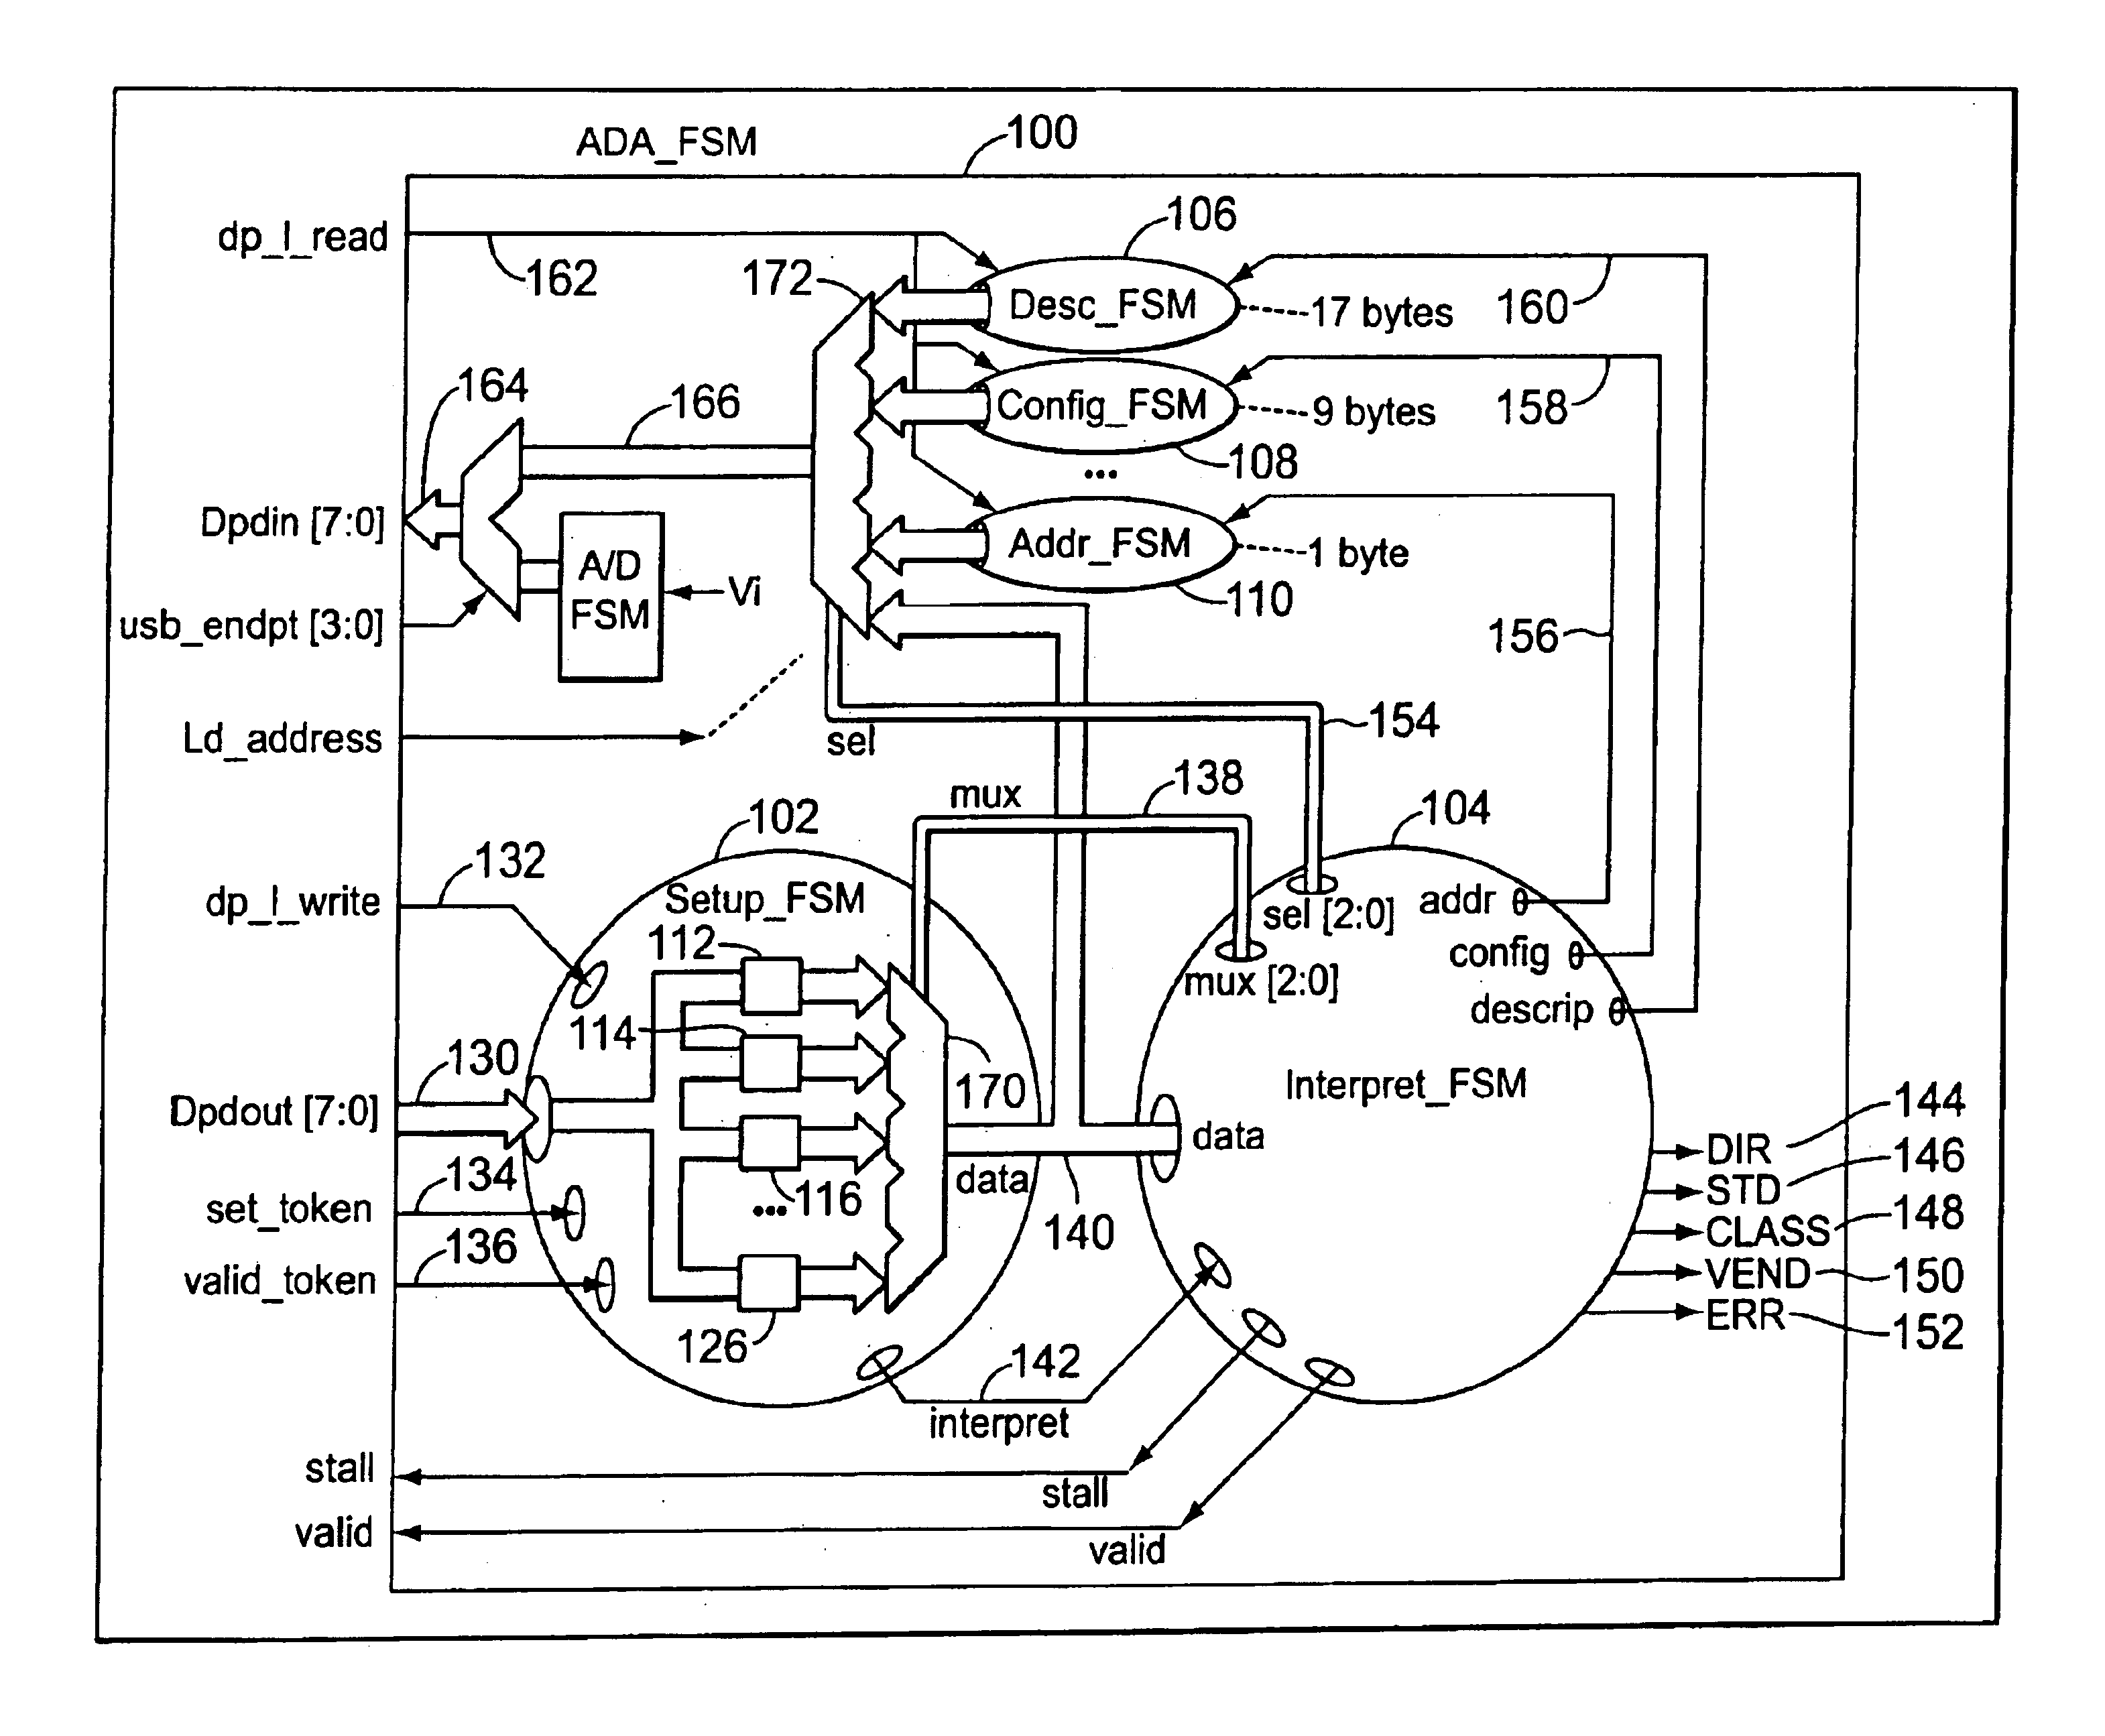 USB device controller